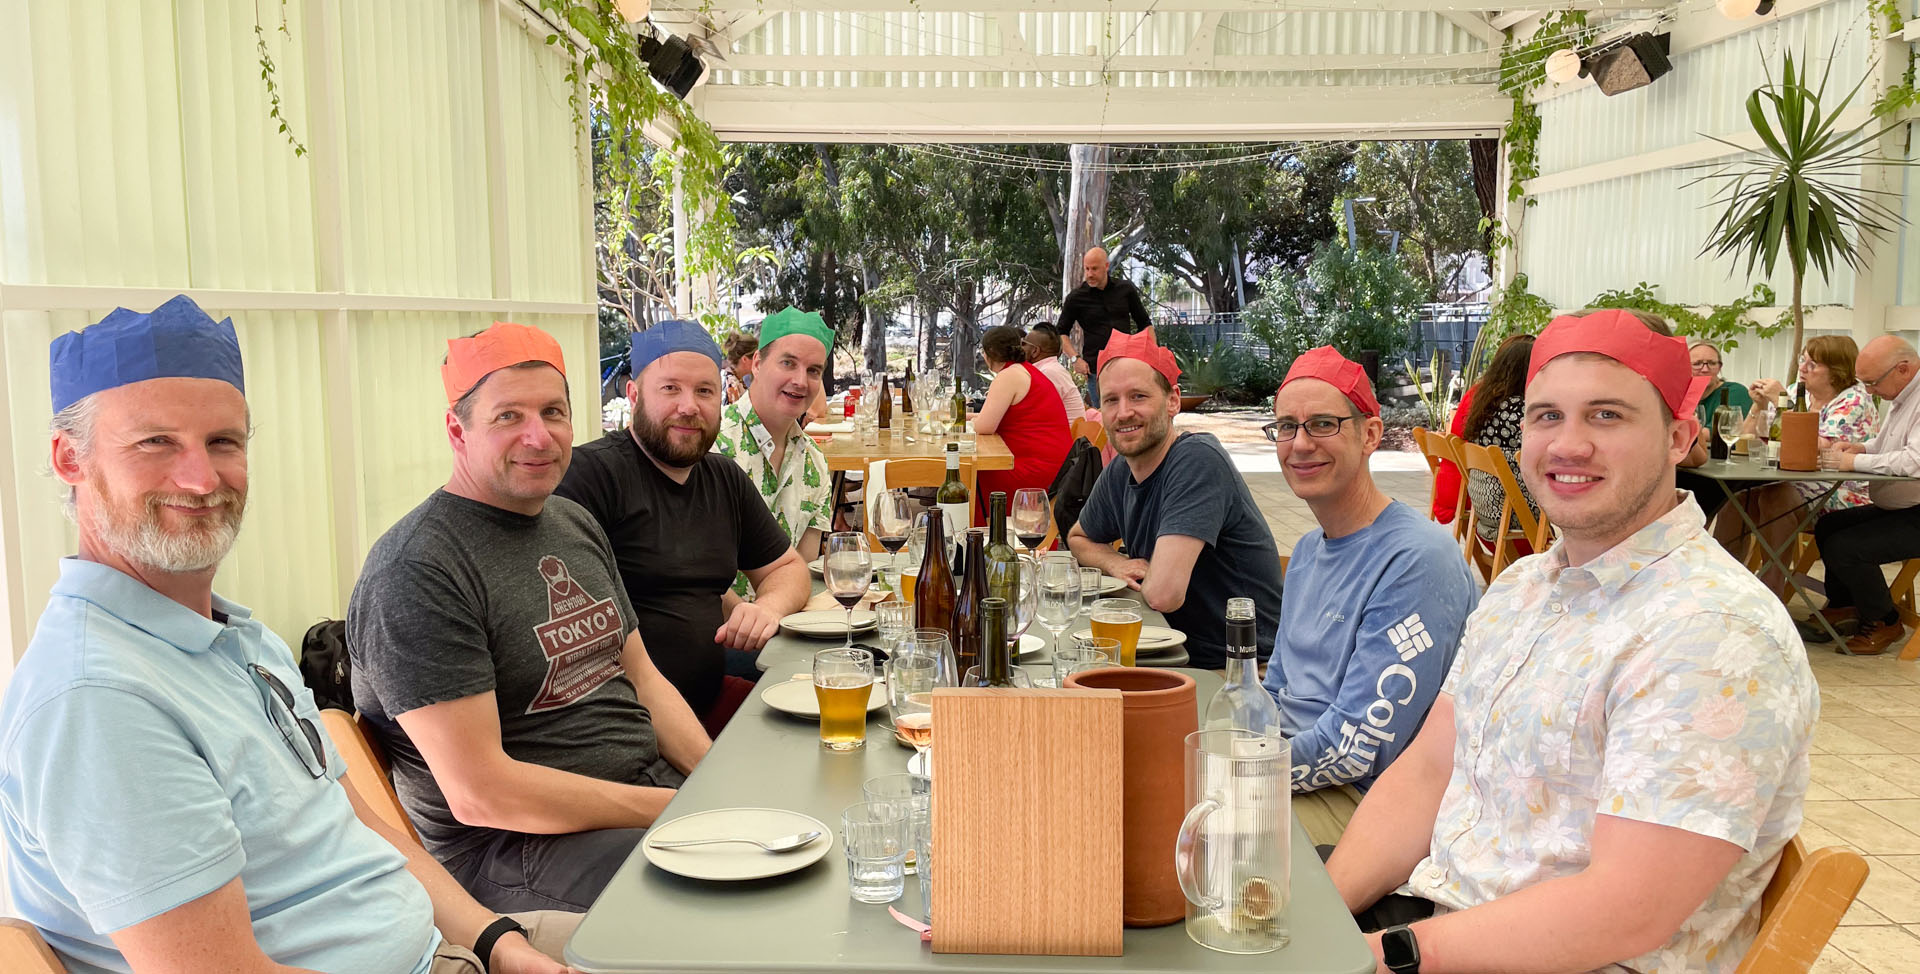 Lunch in our festive paper crowns